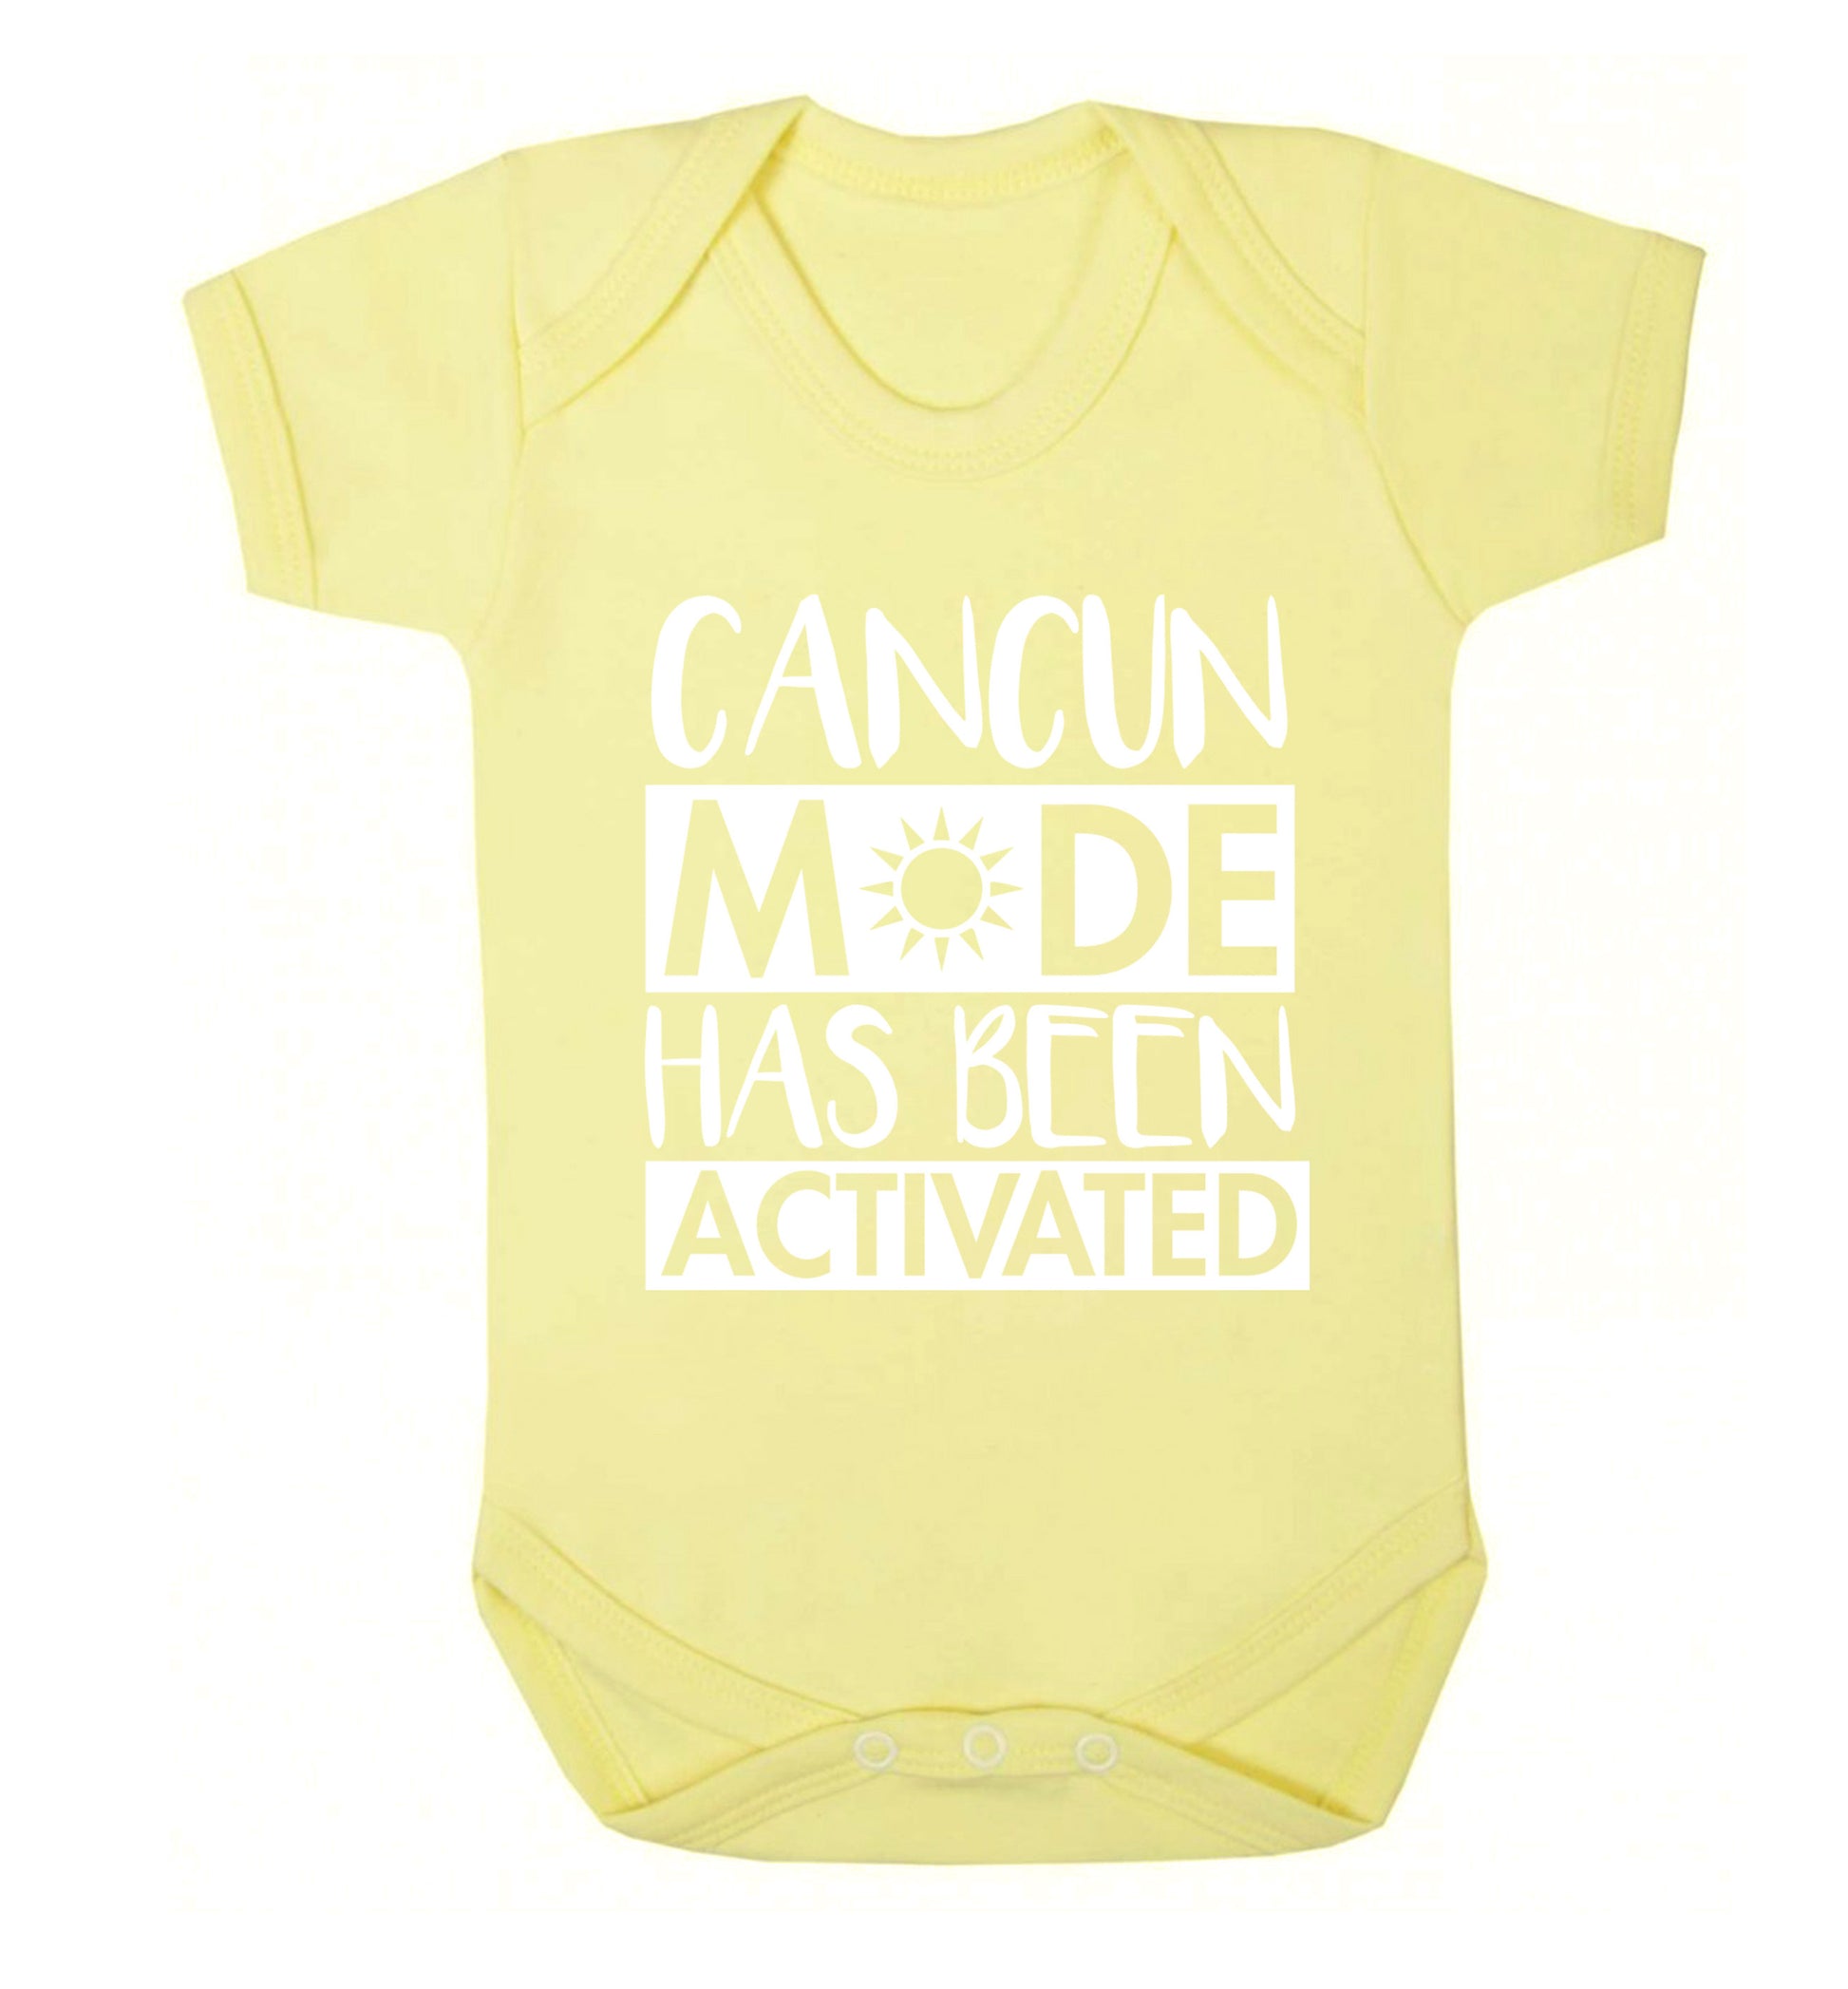 Cancun mode has been activated Baby Vest pale yellow 18-24 months